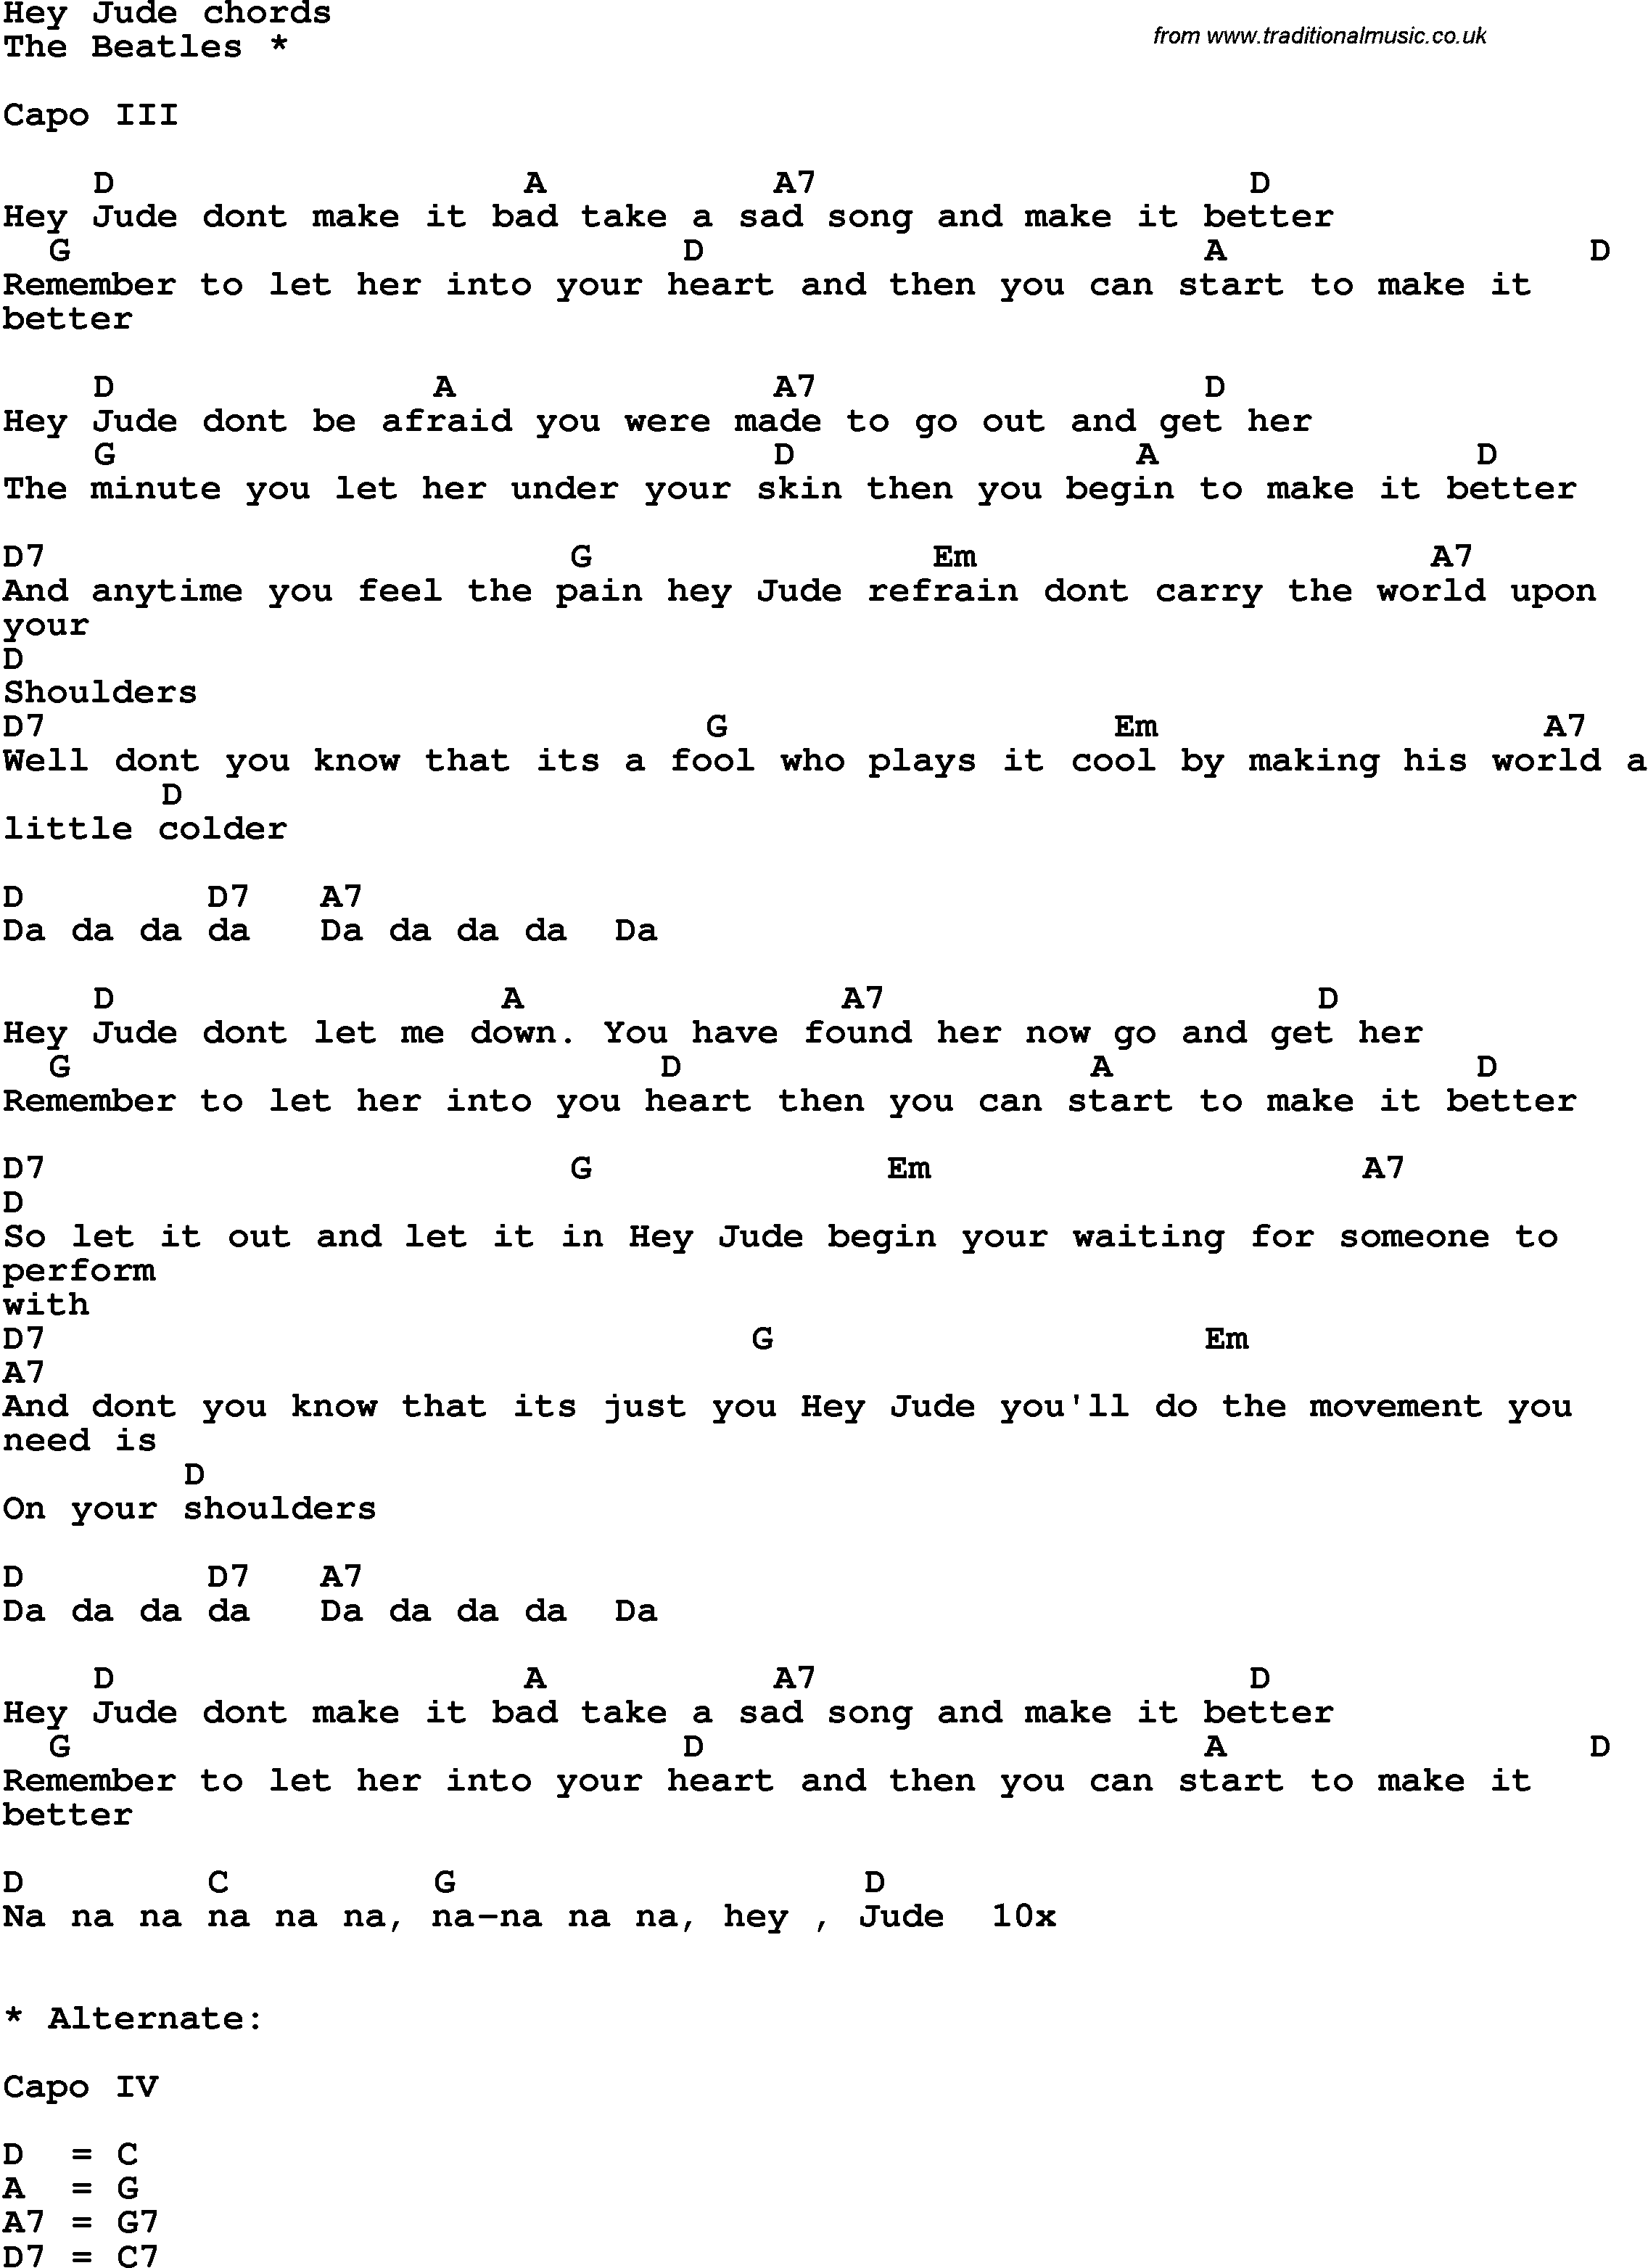 Song Lyrics with guitar chords for Hey Jude - The Beatles